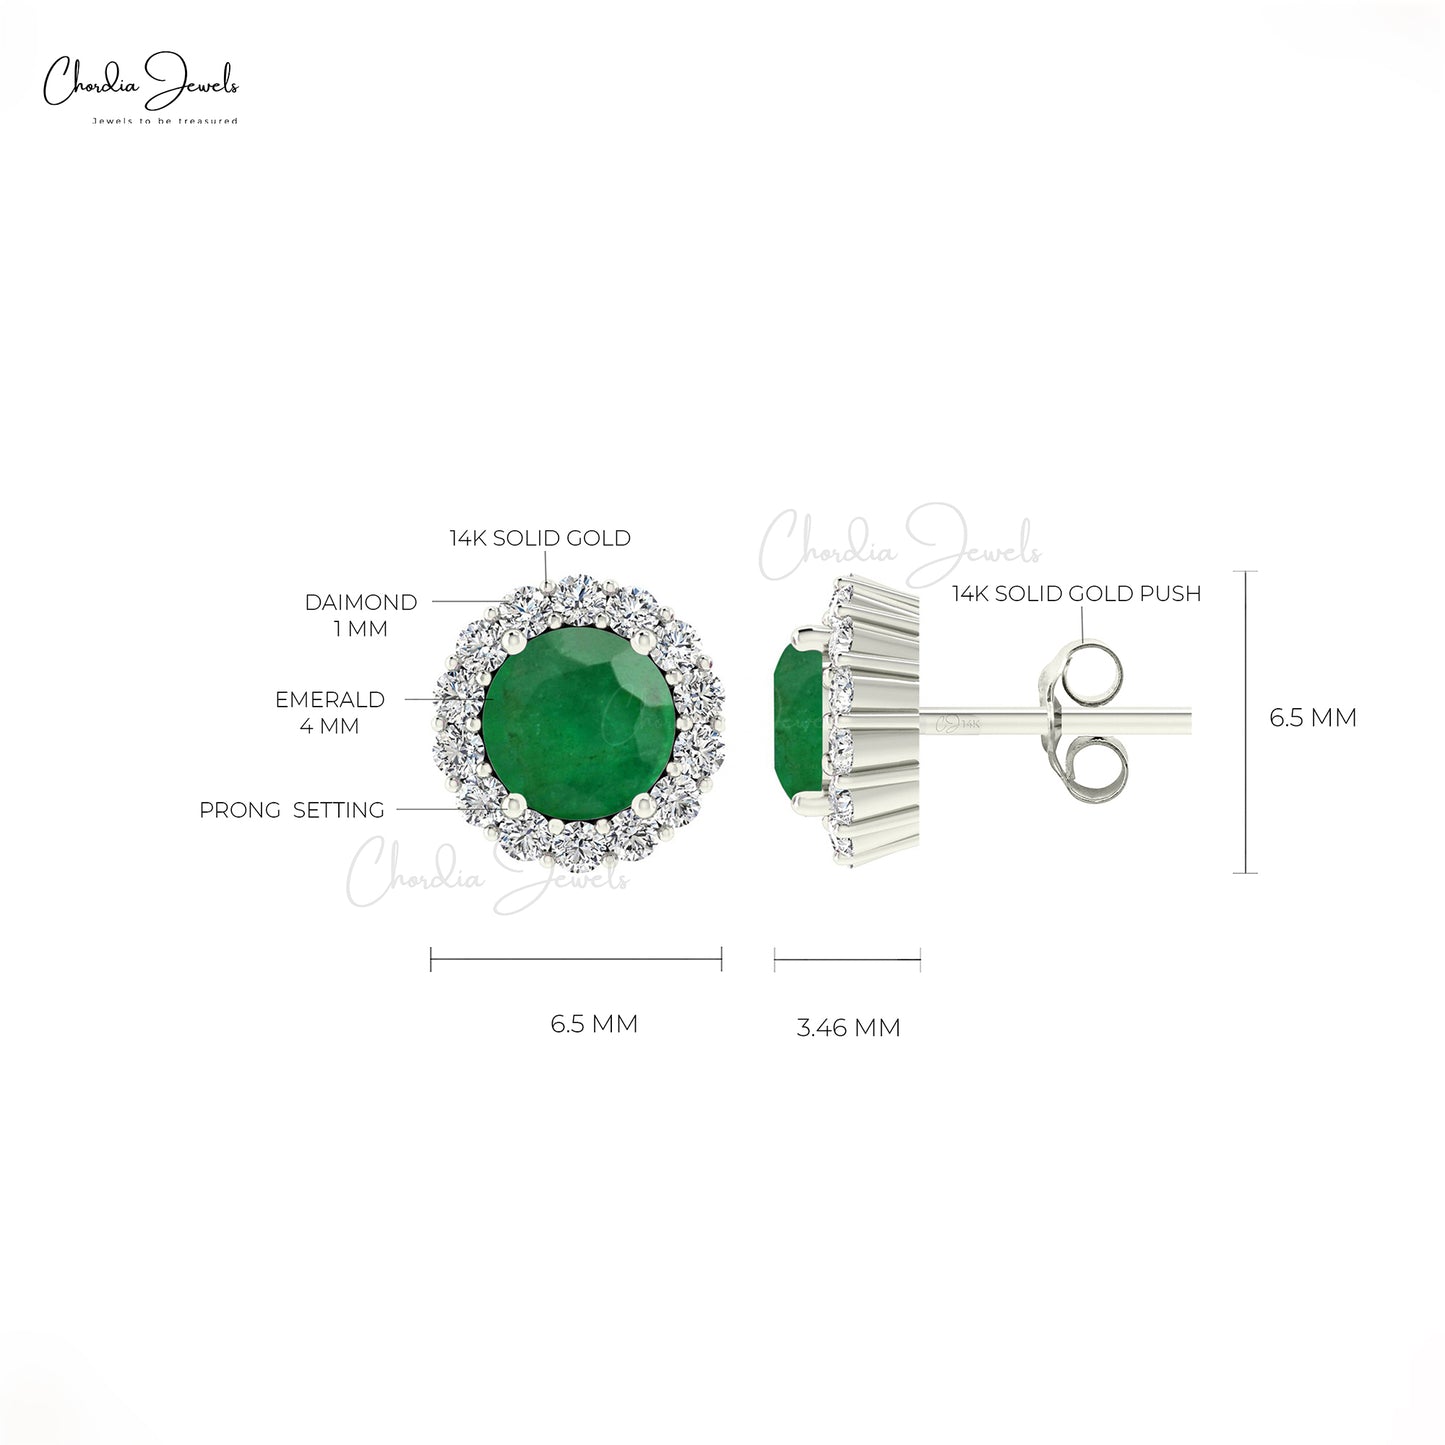 Make a statement with emerald earrings.